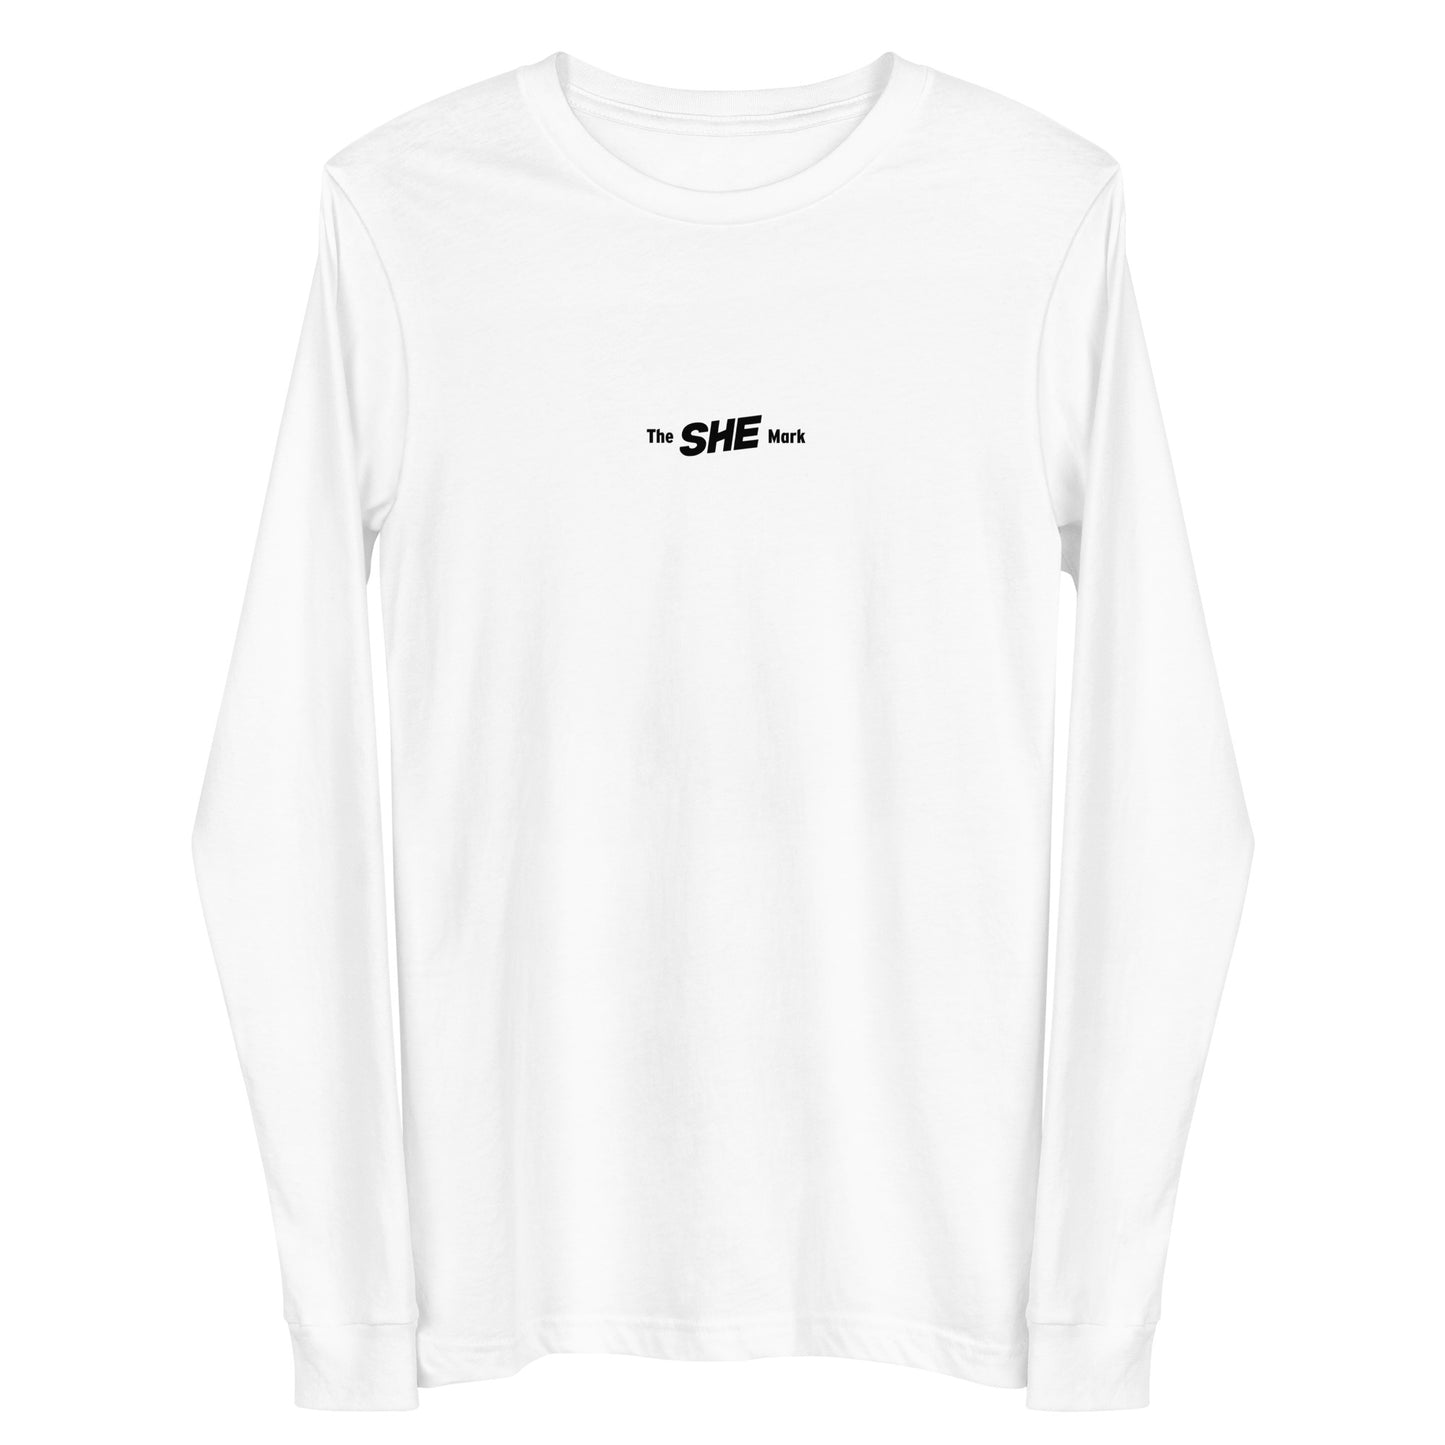 White long-sleeve crew neck shirt with the words "The SHE Mark" printed in black.